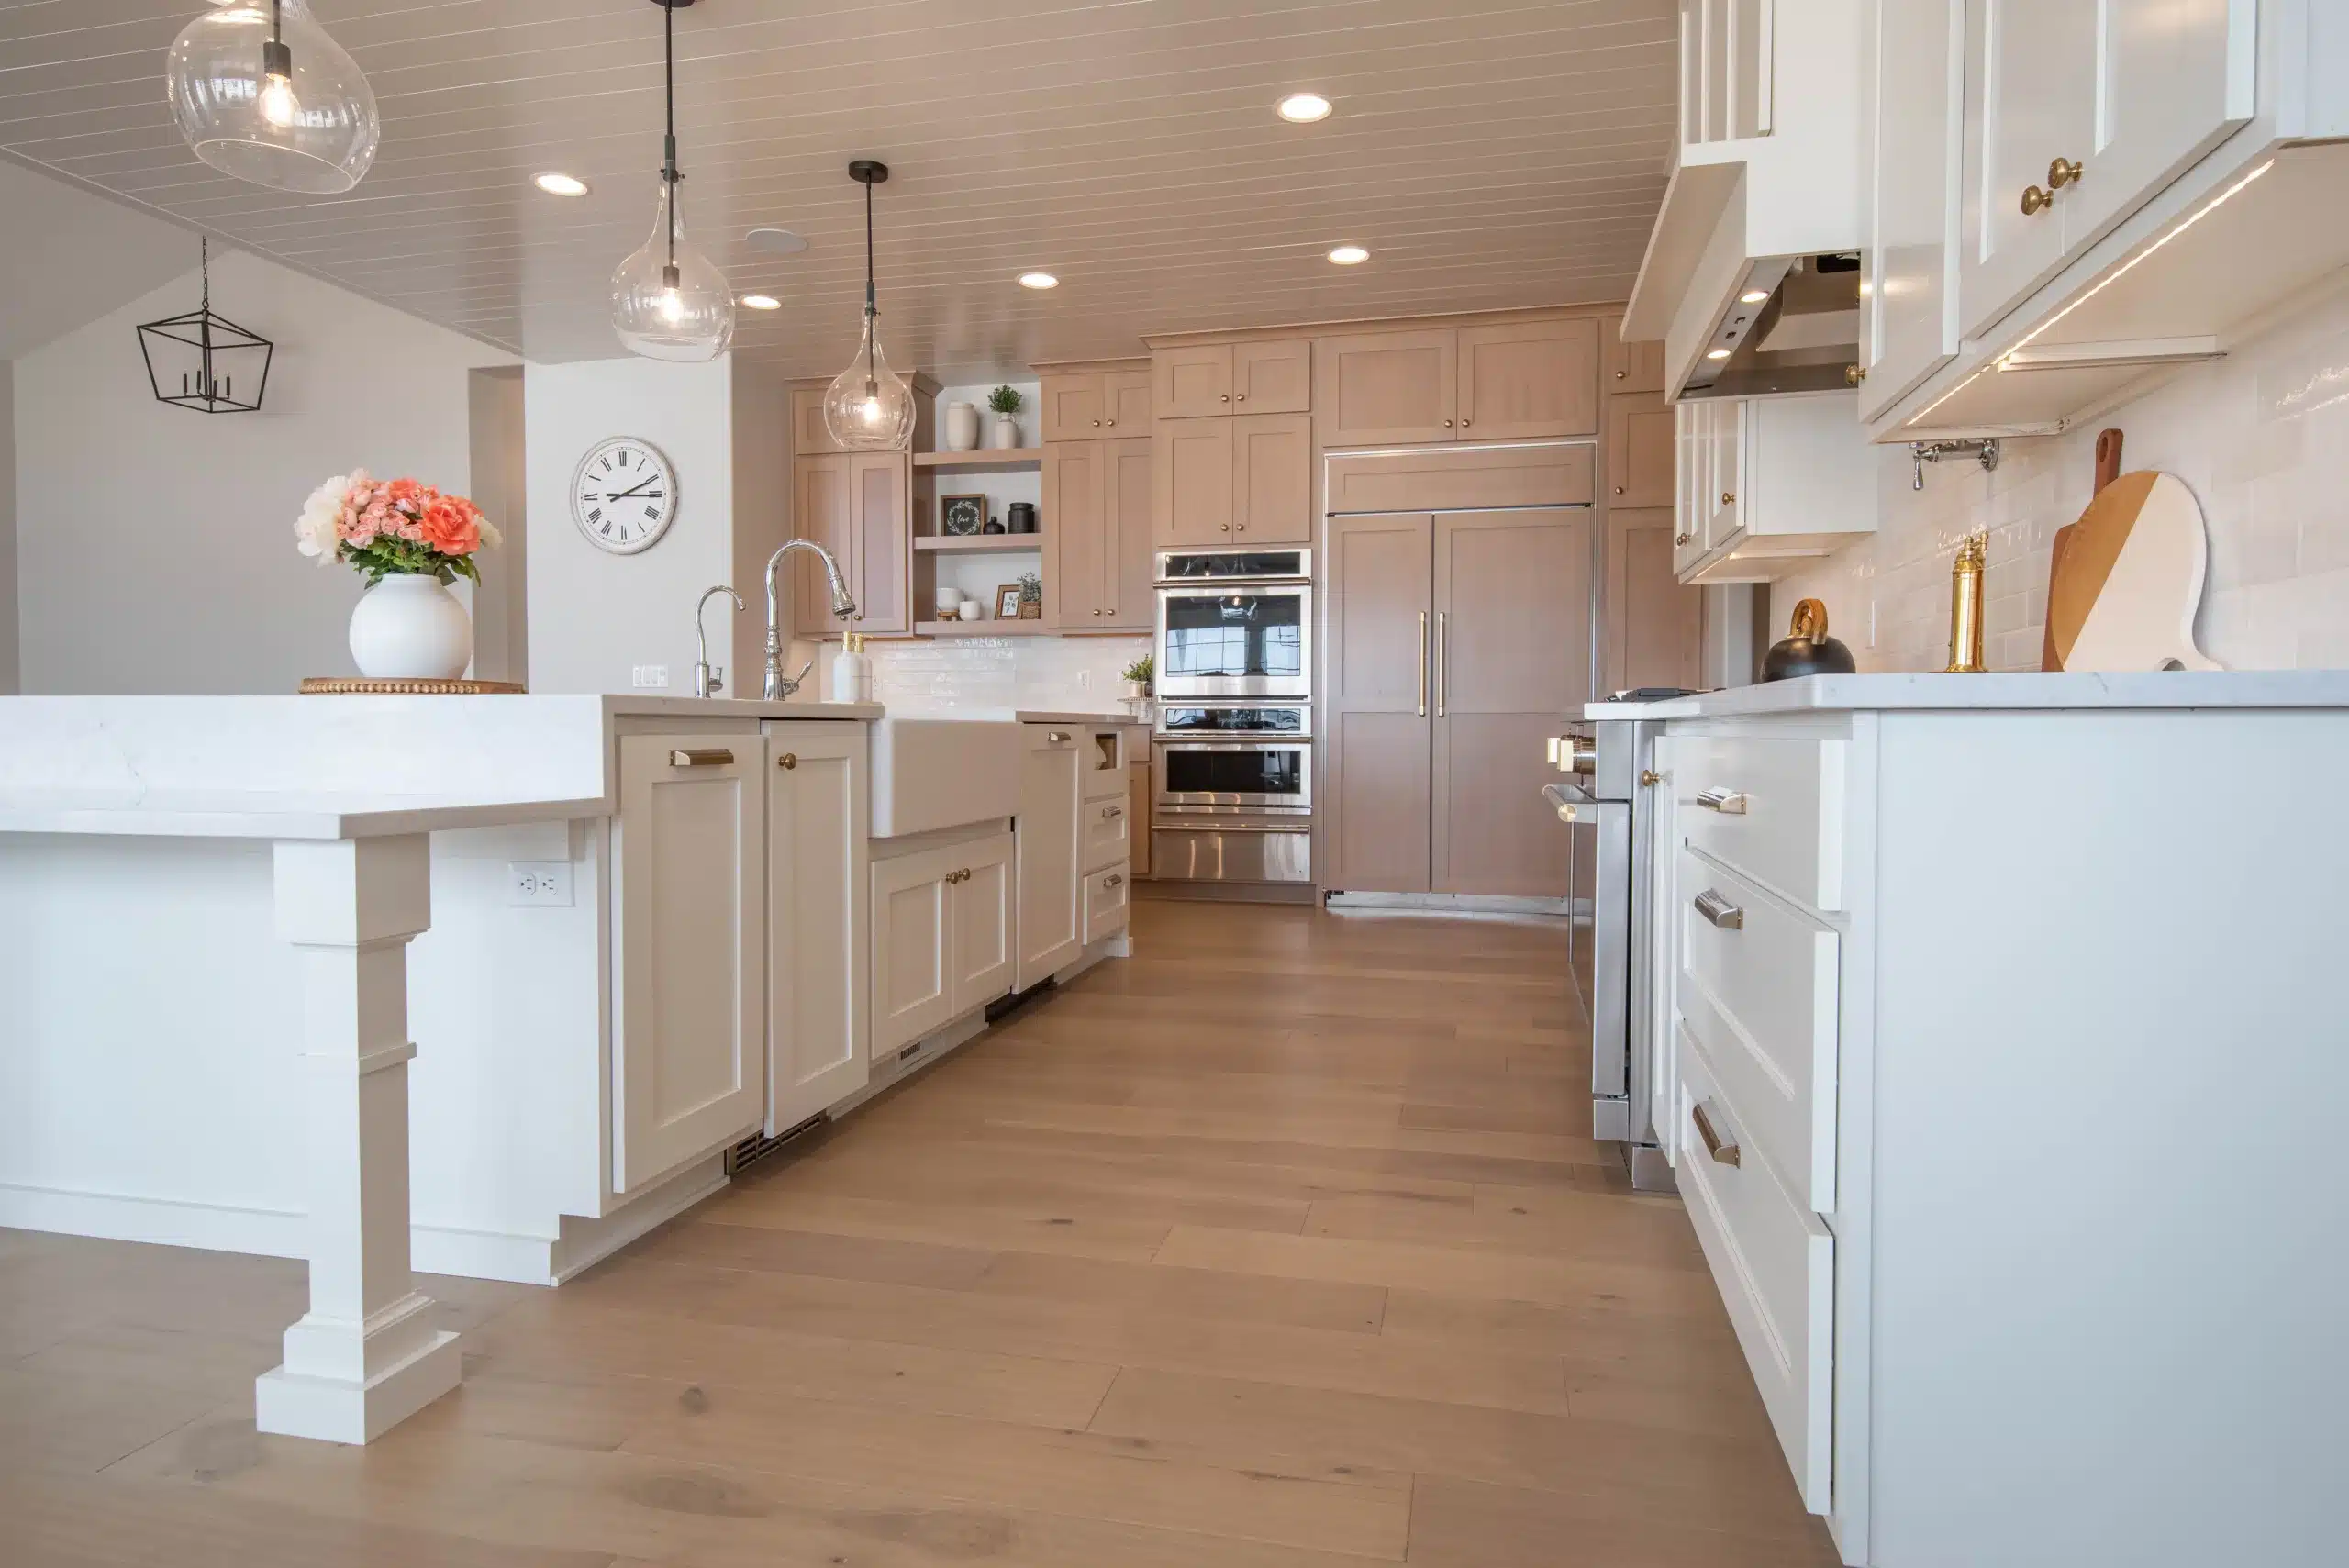 Kitchen Cabinets and Countertops in West Layton, UT